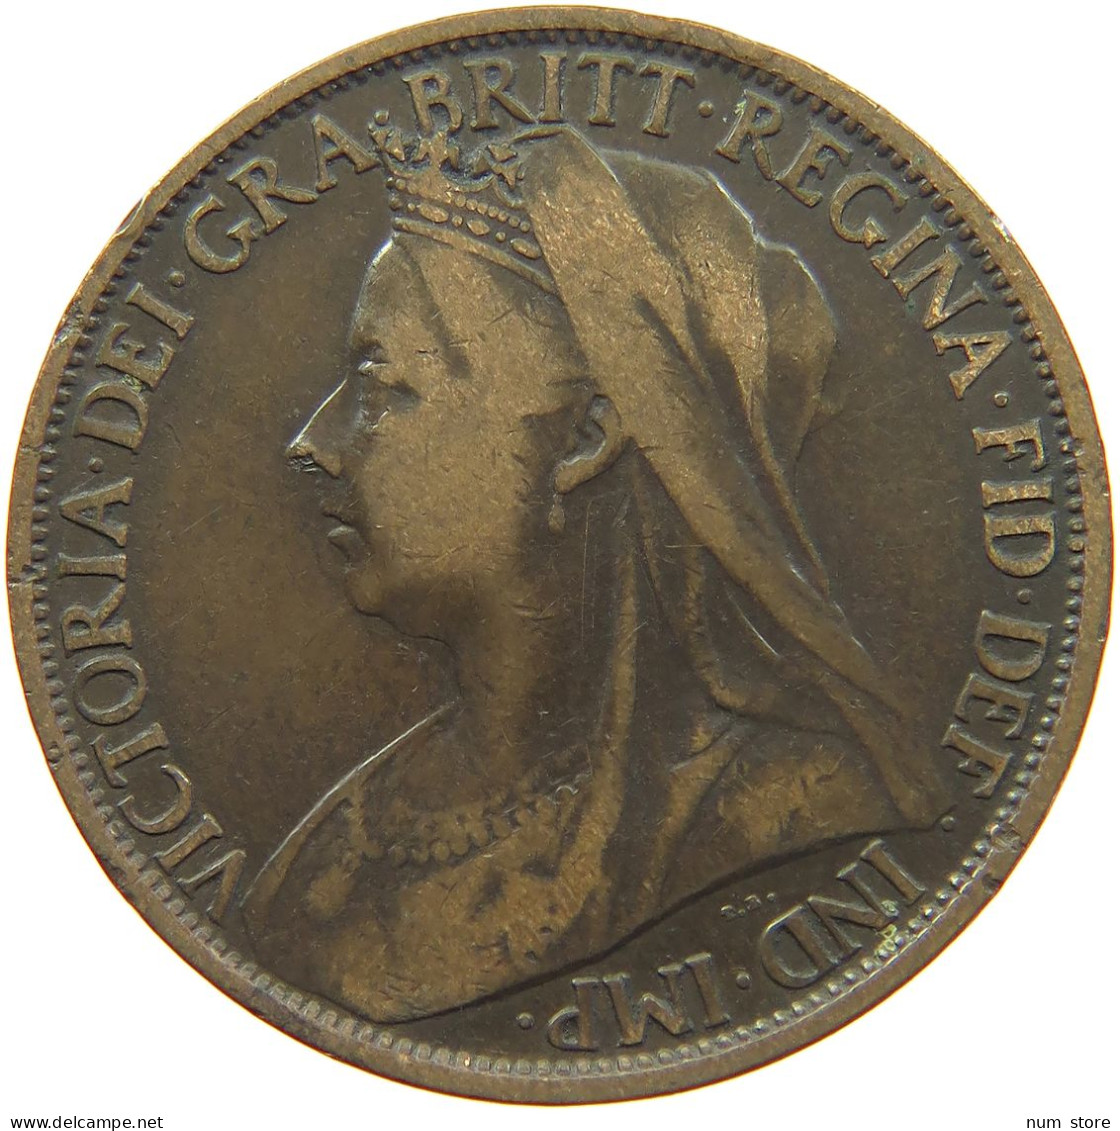 GREAT BRITAIN PENNY 1898 Victoria 1837-1901 #s001 0245 - D. 1 Penny